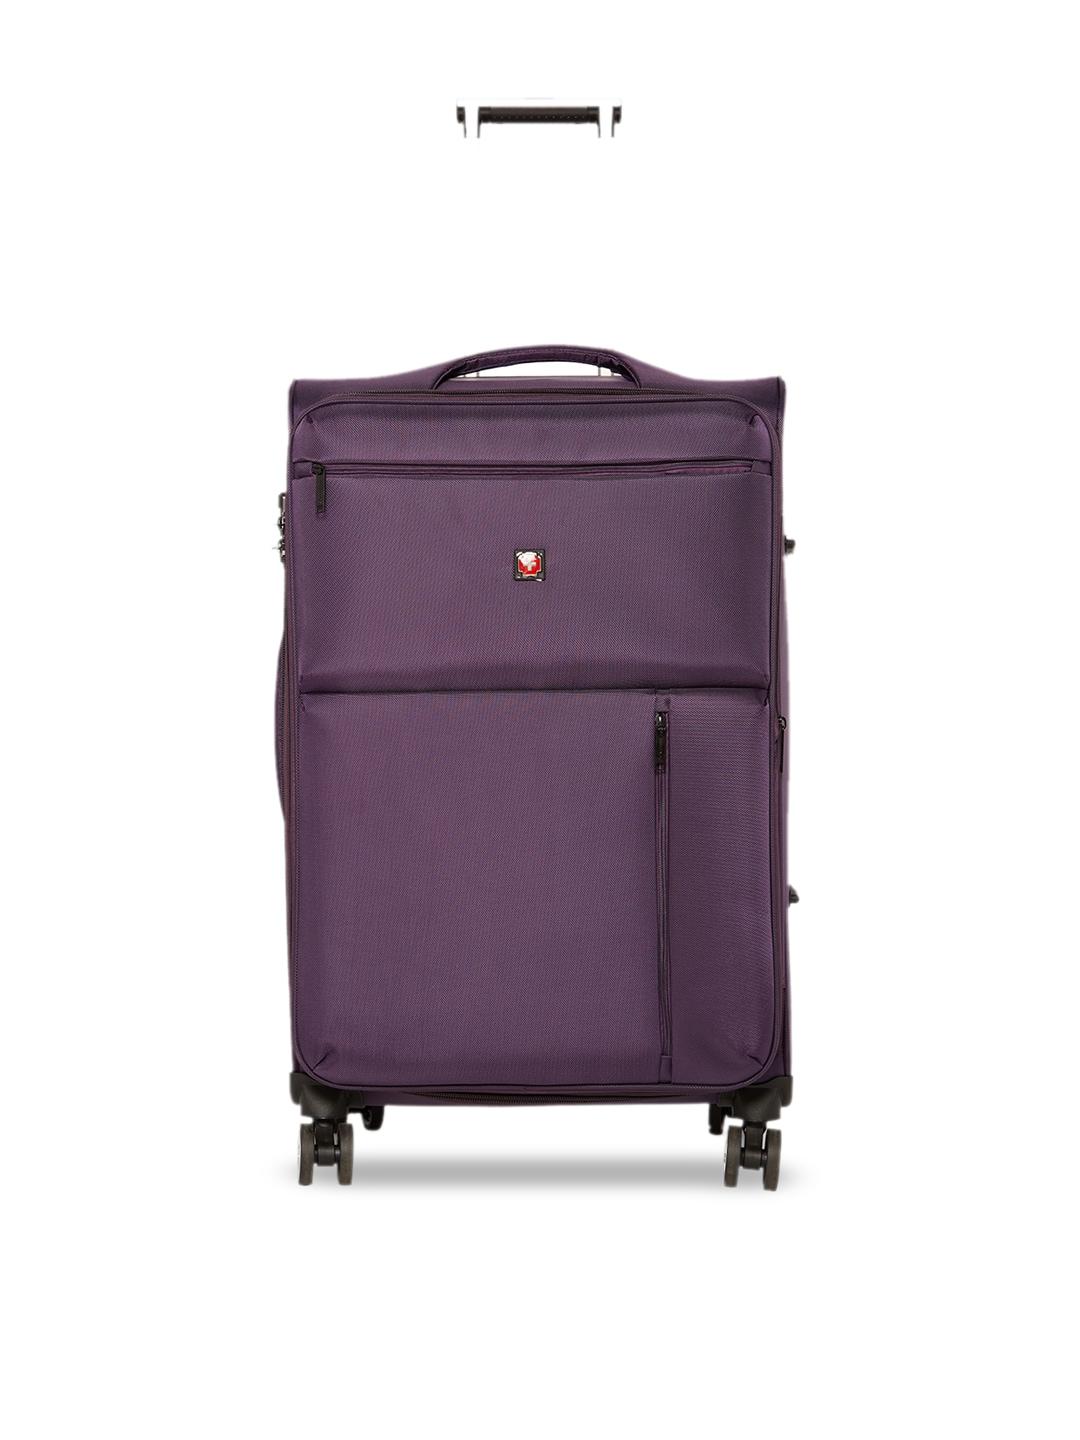 swiss-brand-unisex-purple-solid-locarno-360-degree-rotation-soft-sided-large-trolley-suitcase